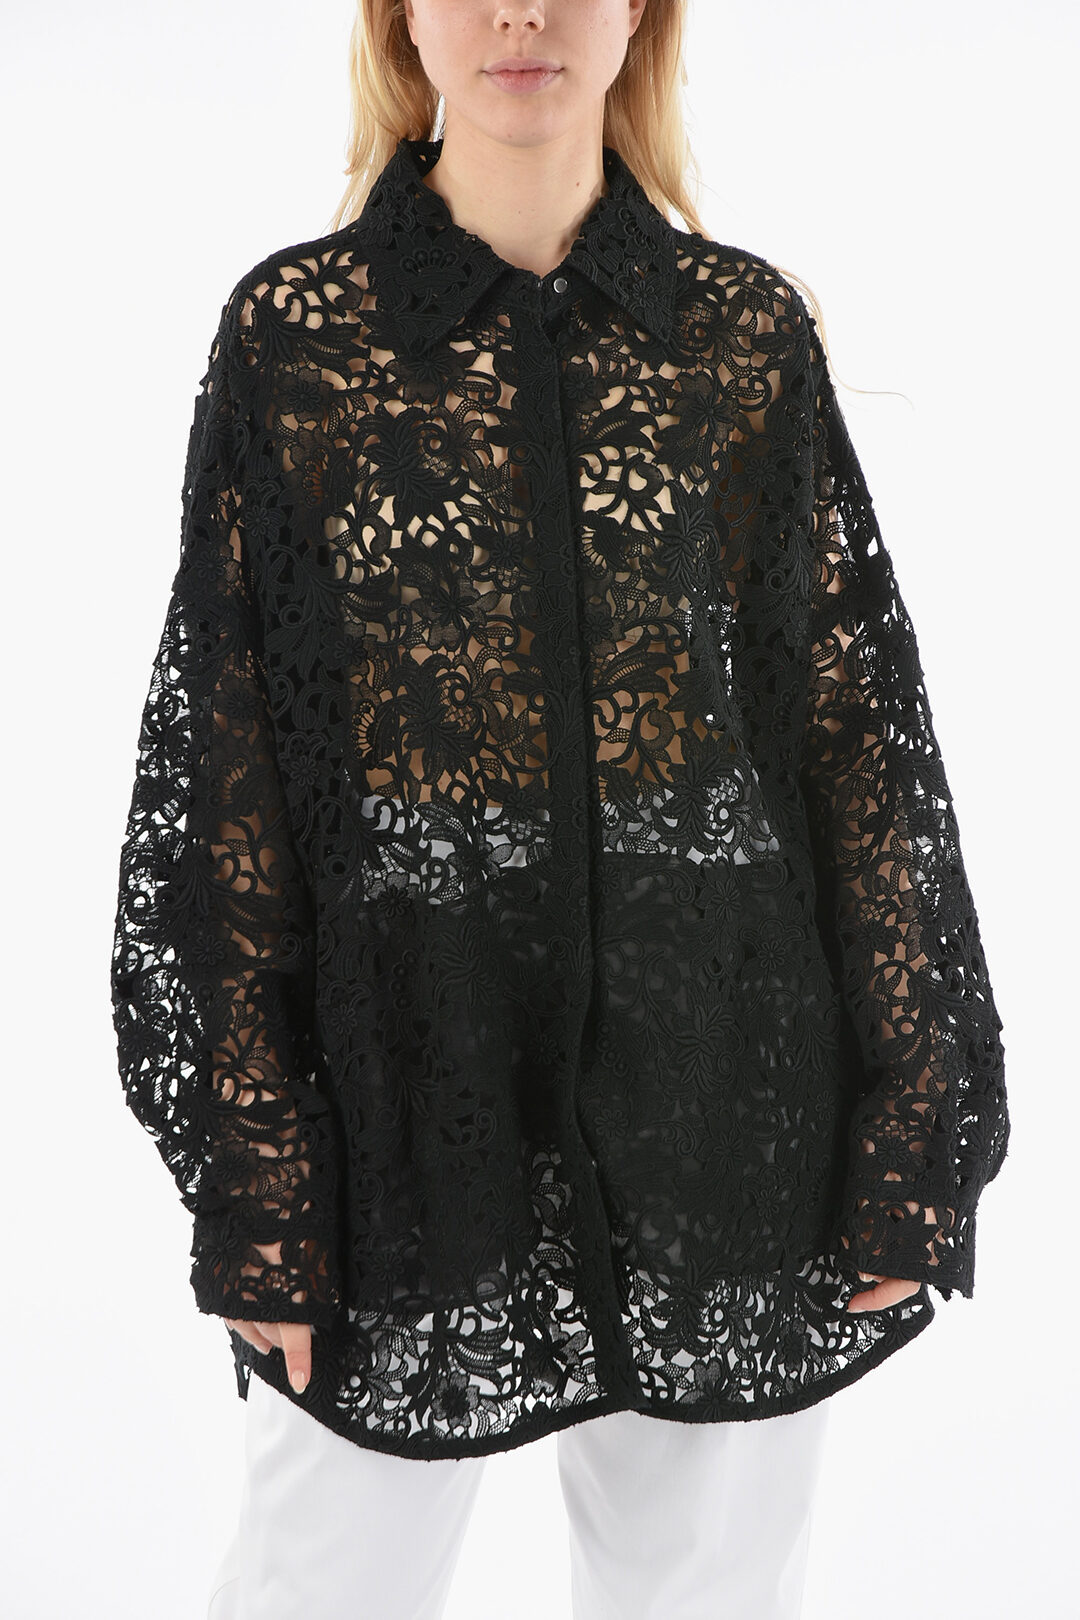 Valentino Lace Overshirt with Snap Buttons women - Glamood Outlet